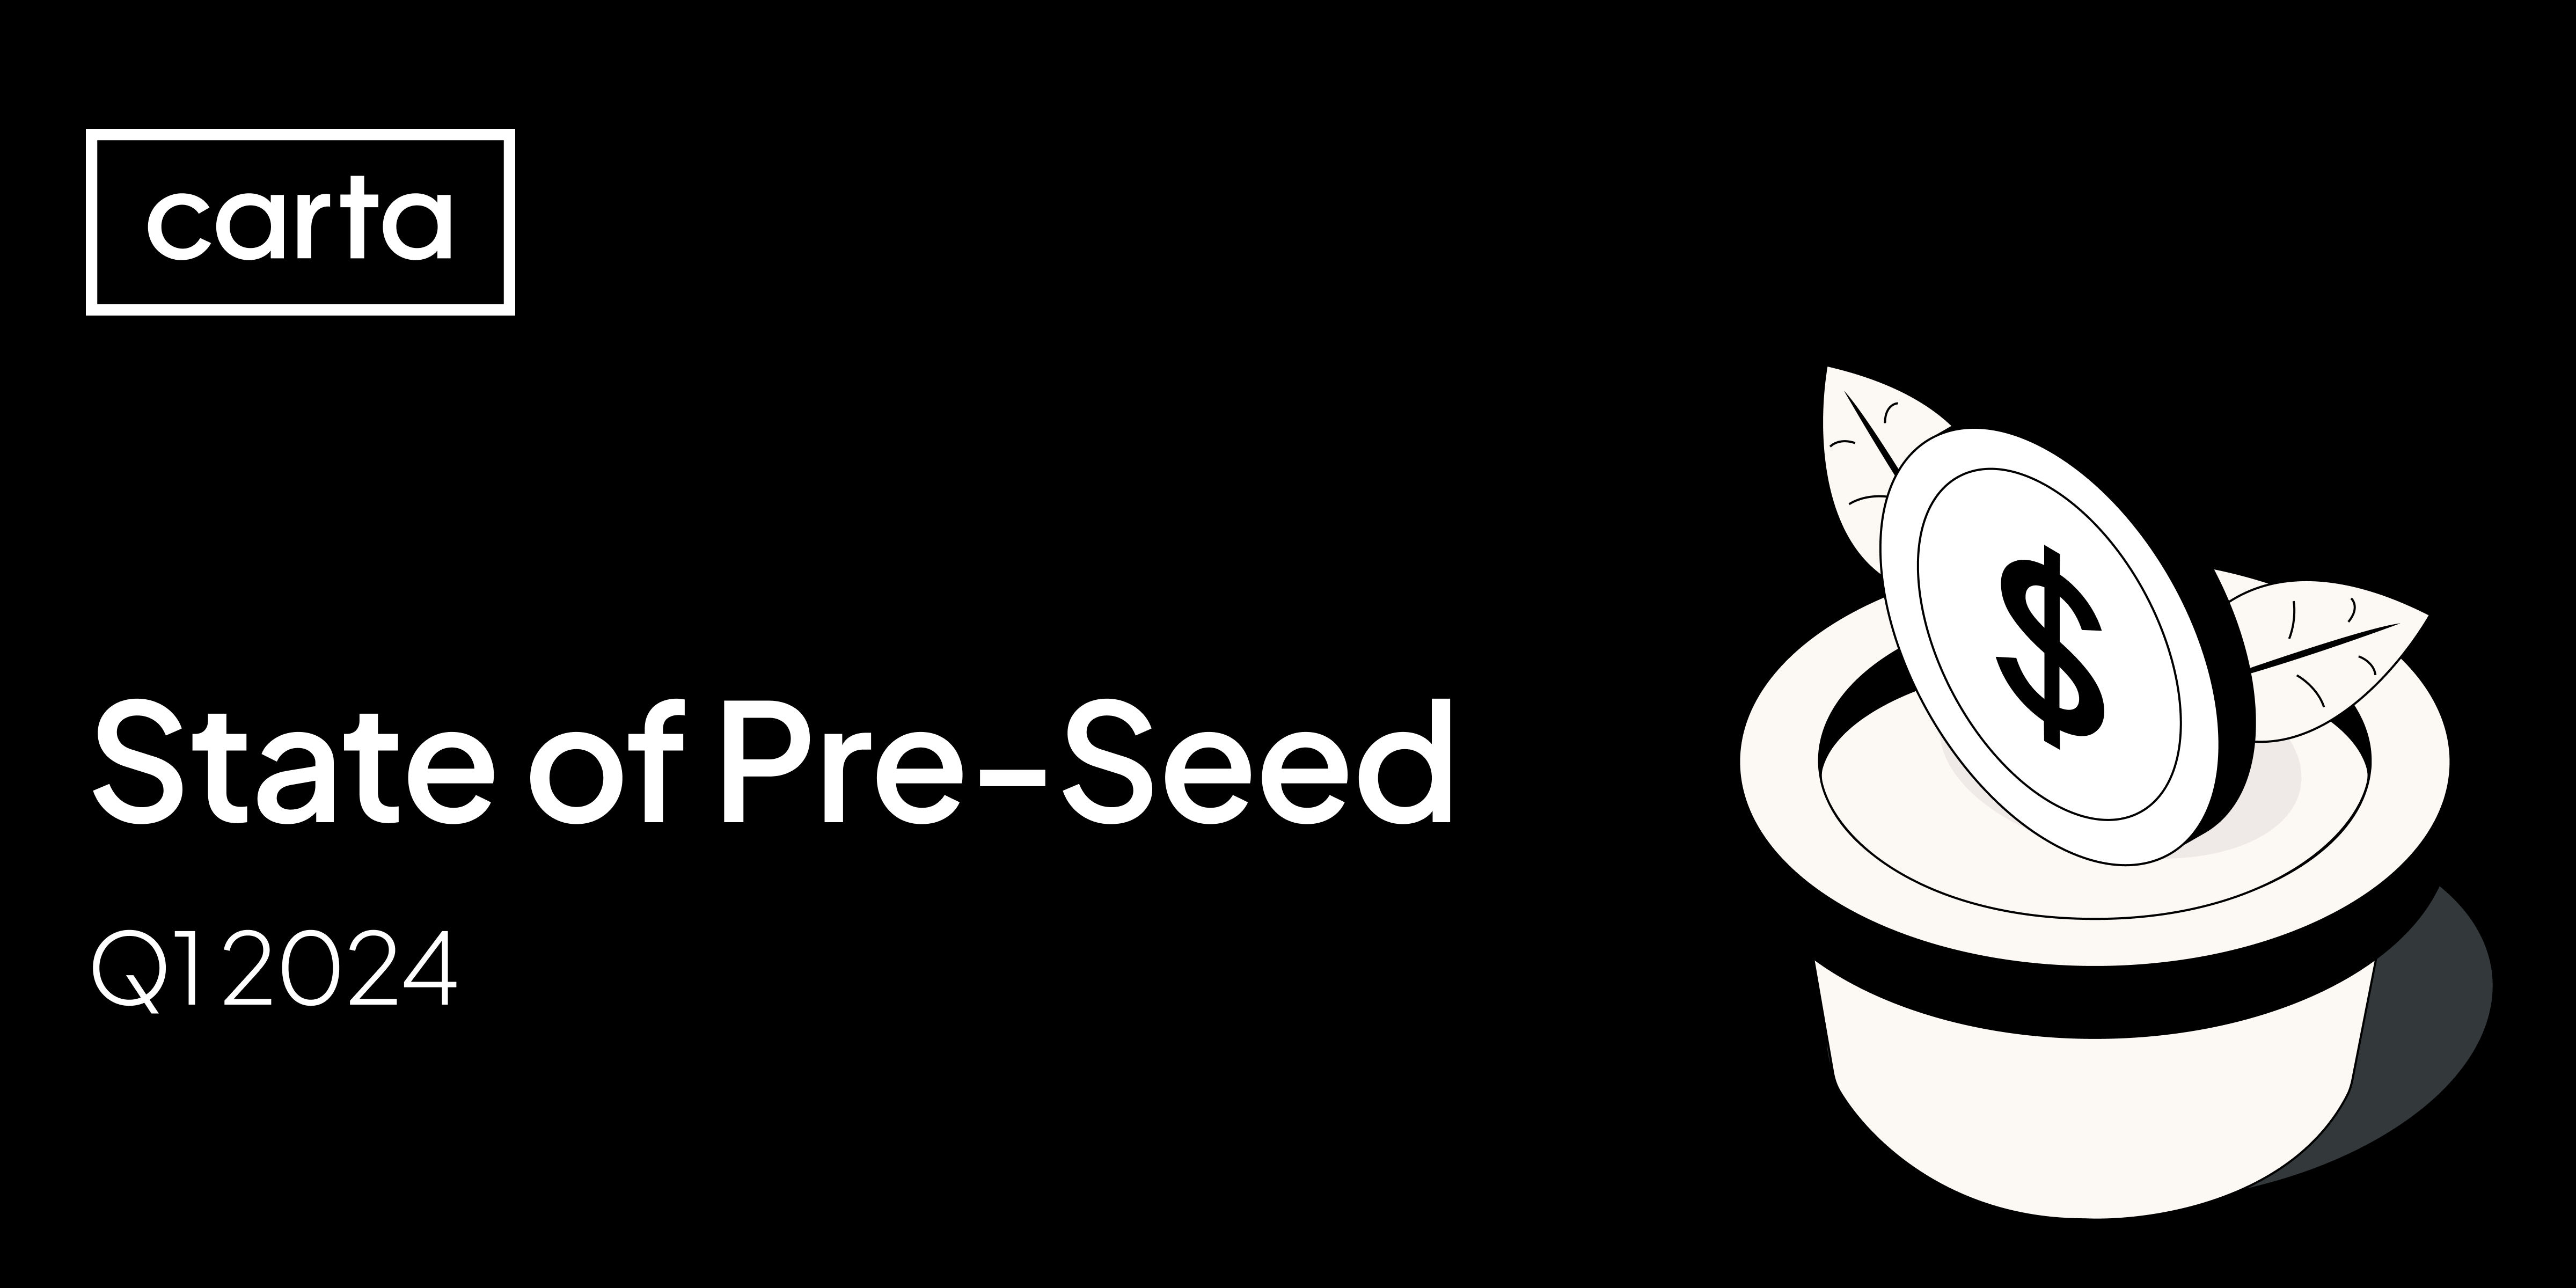 State of pre-seed: Q1 2024